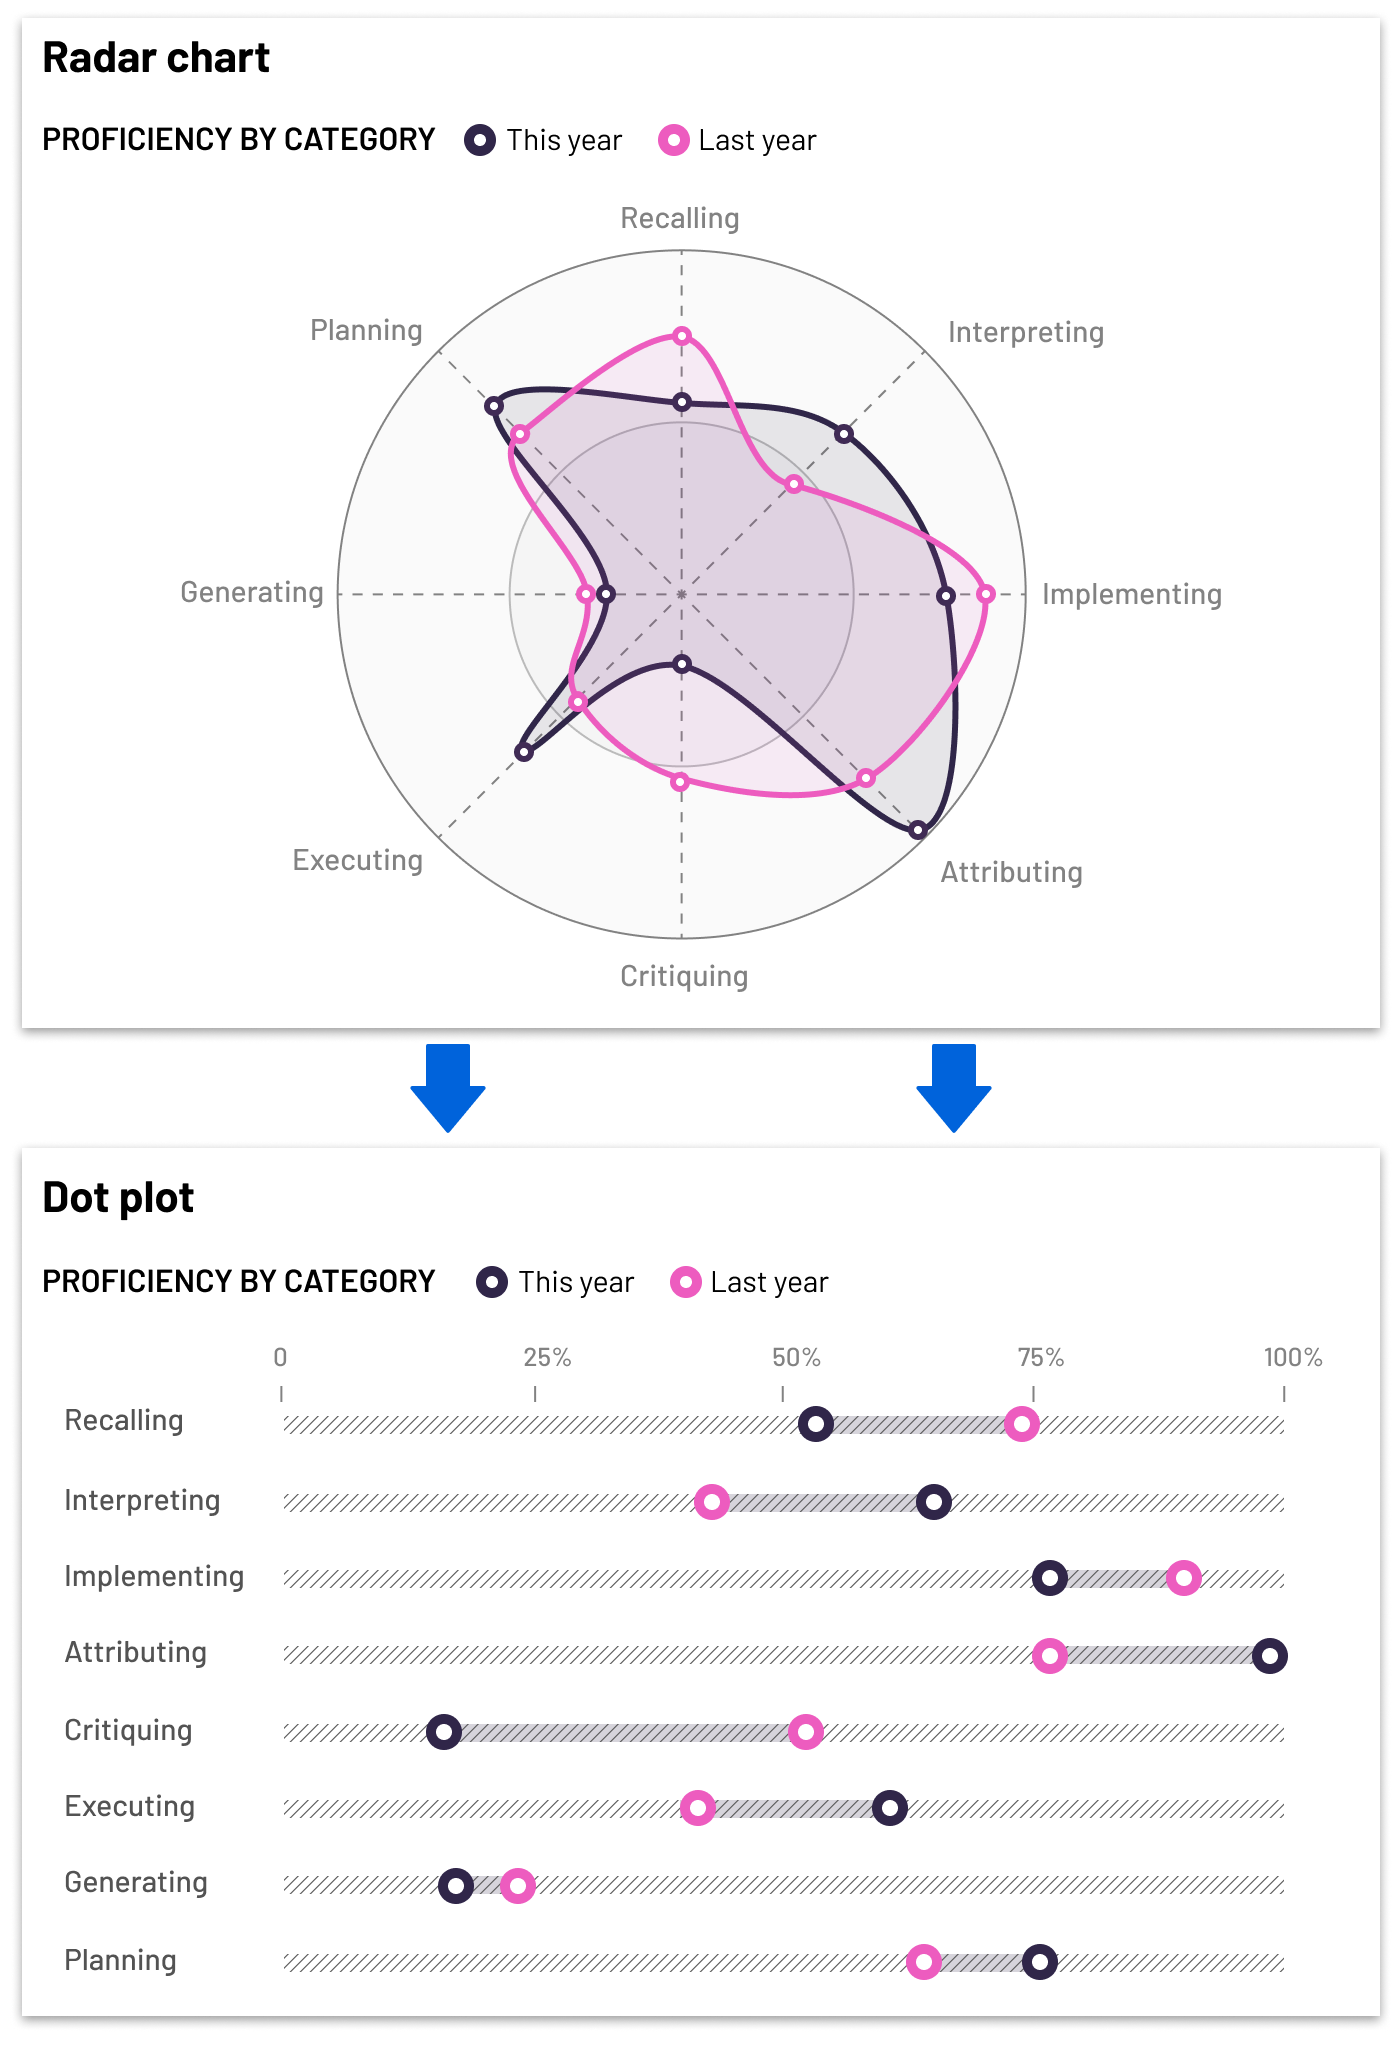 Two charts, showing a radar chart and a dot plot that highlights that the dot plot is easier for users to read.